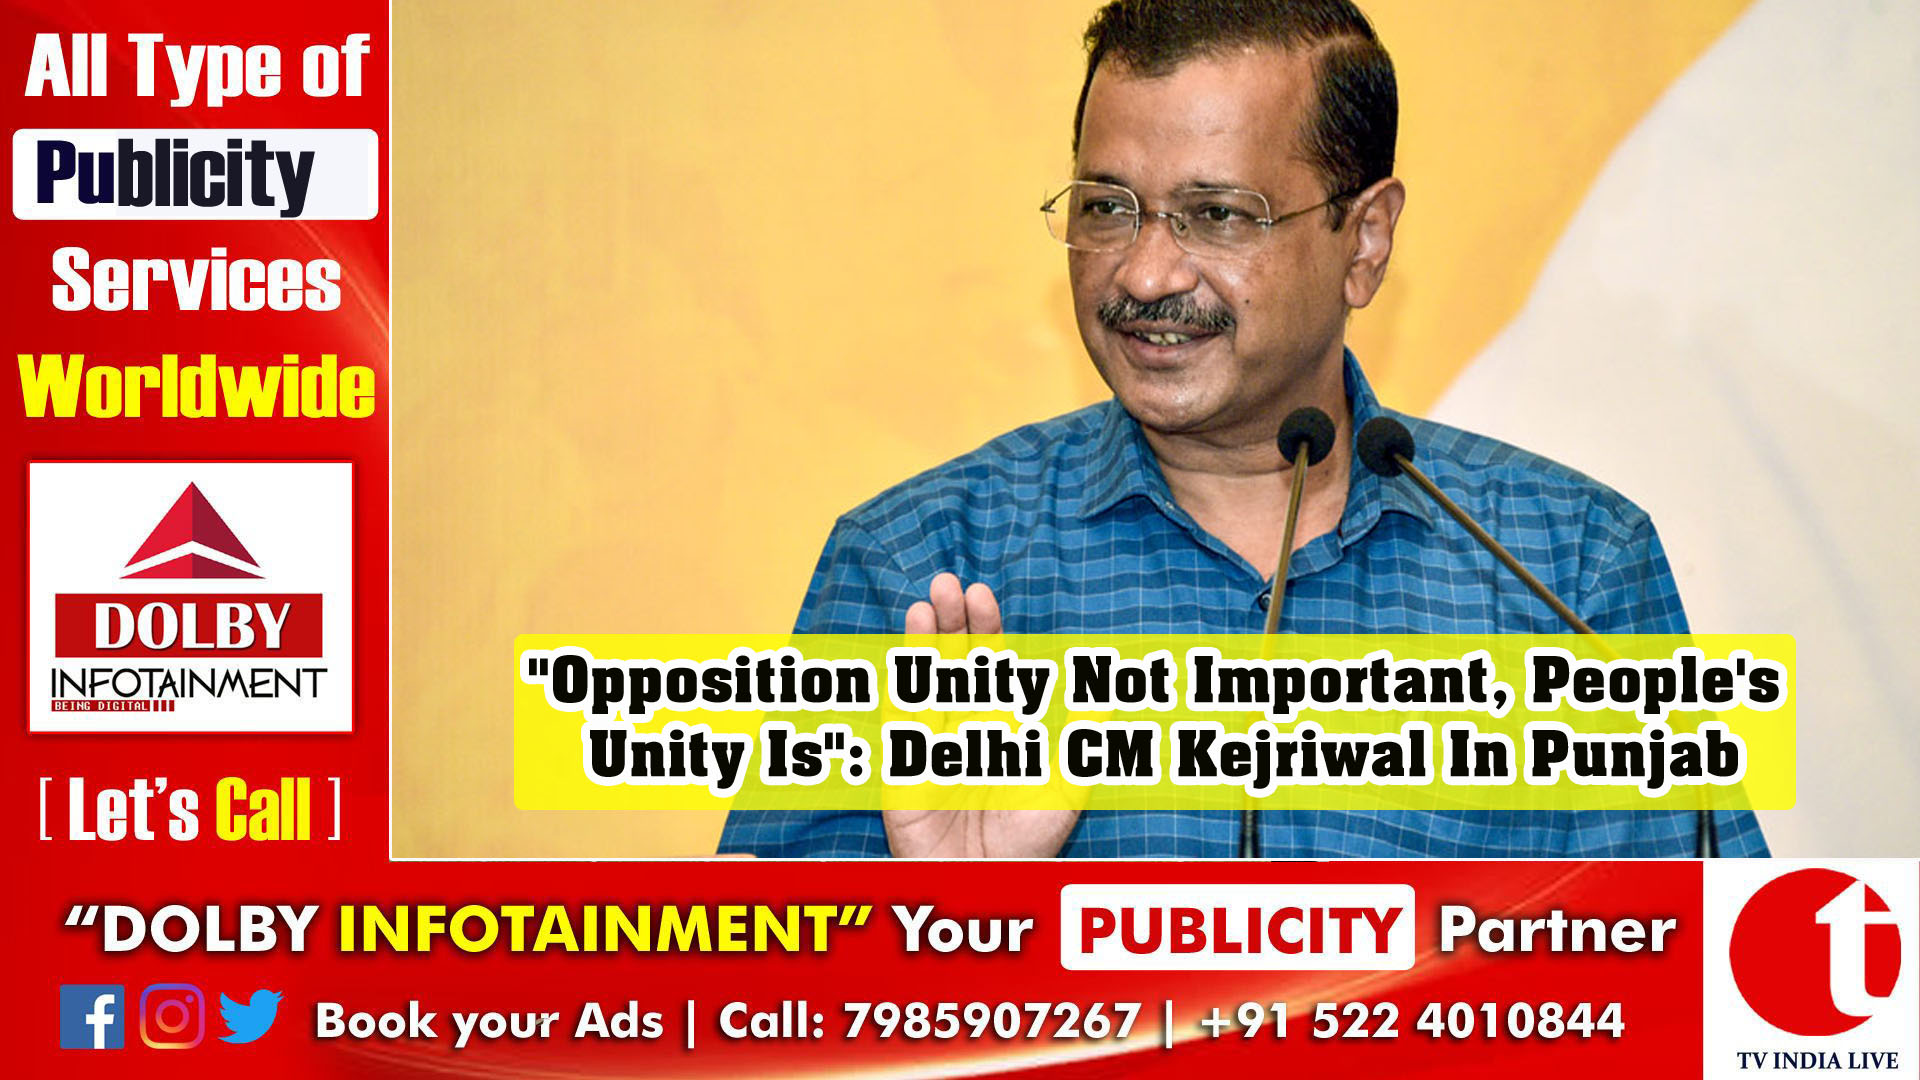 "Opposition Unity Not Important, People's Unity Is": Delhi CM Kejriwal in Punjab